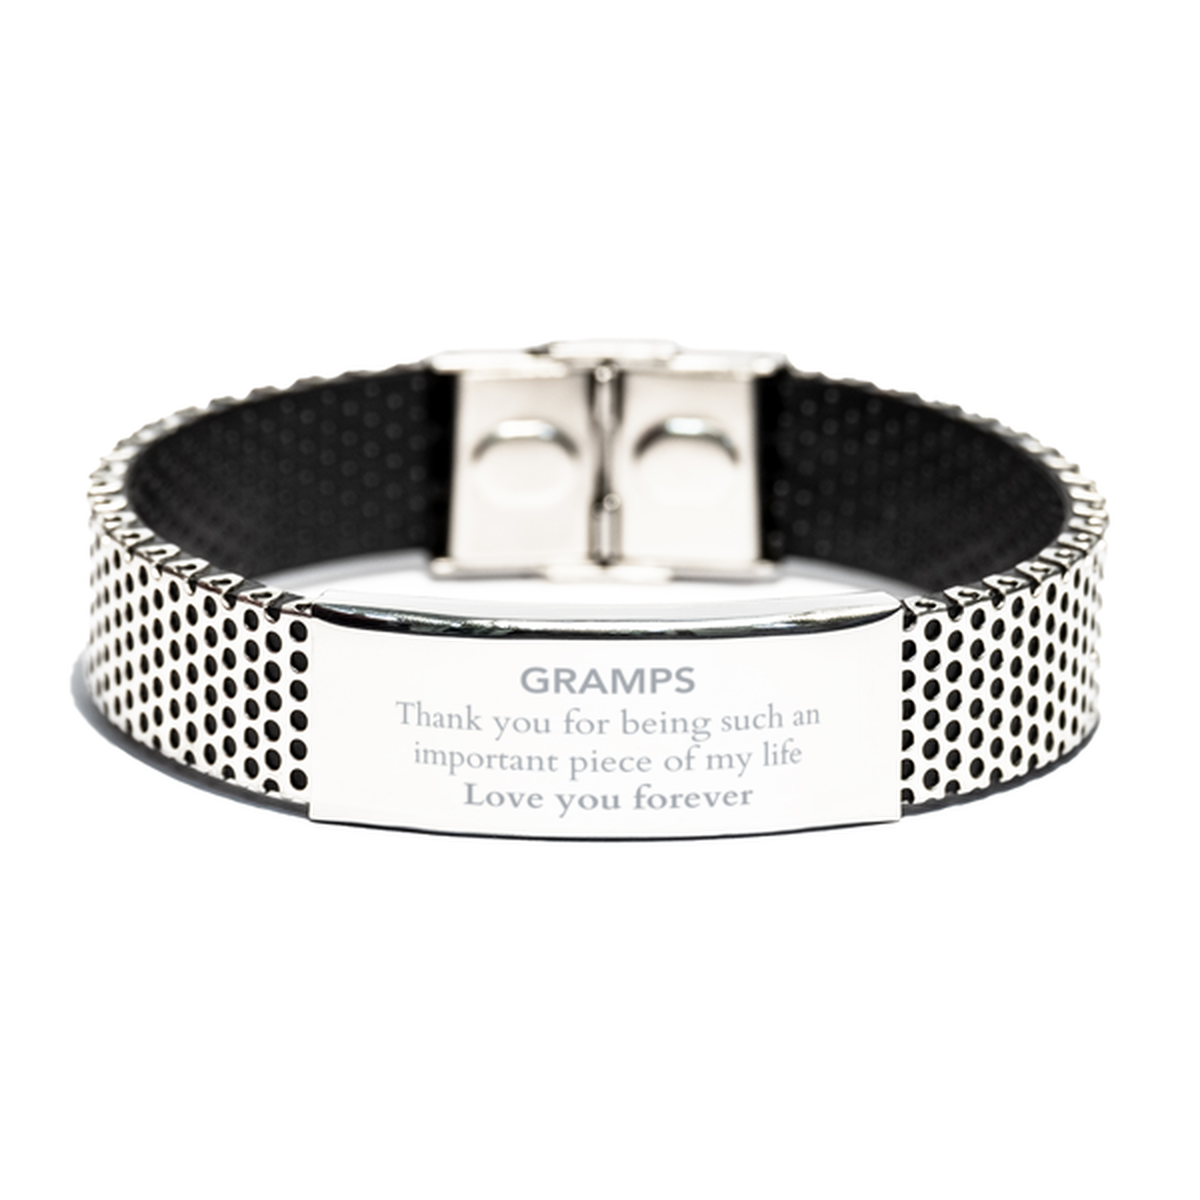 Appropriate Gramps Stainless Steel Bracelet Epic Birthday Gifts for Gramps Thank you for being such an important piece of my life Gramps Christmas Mothers Fathers Day